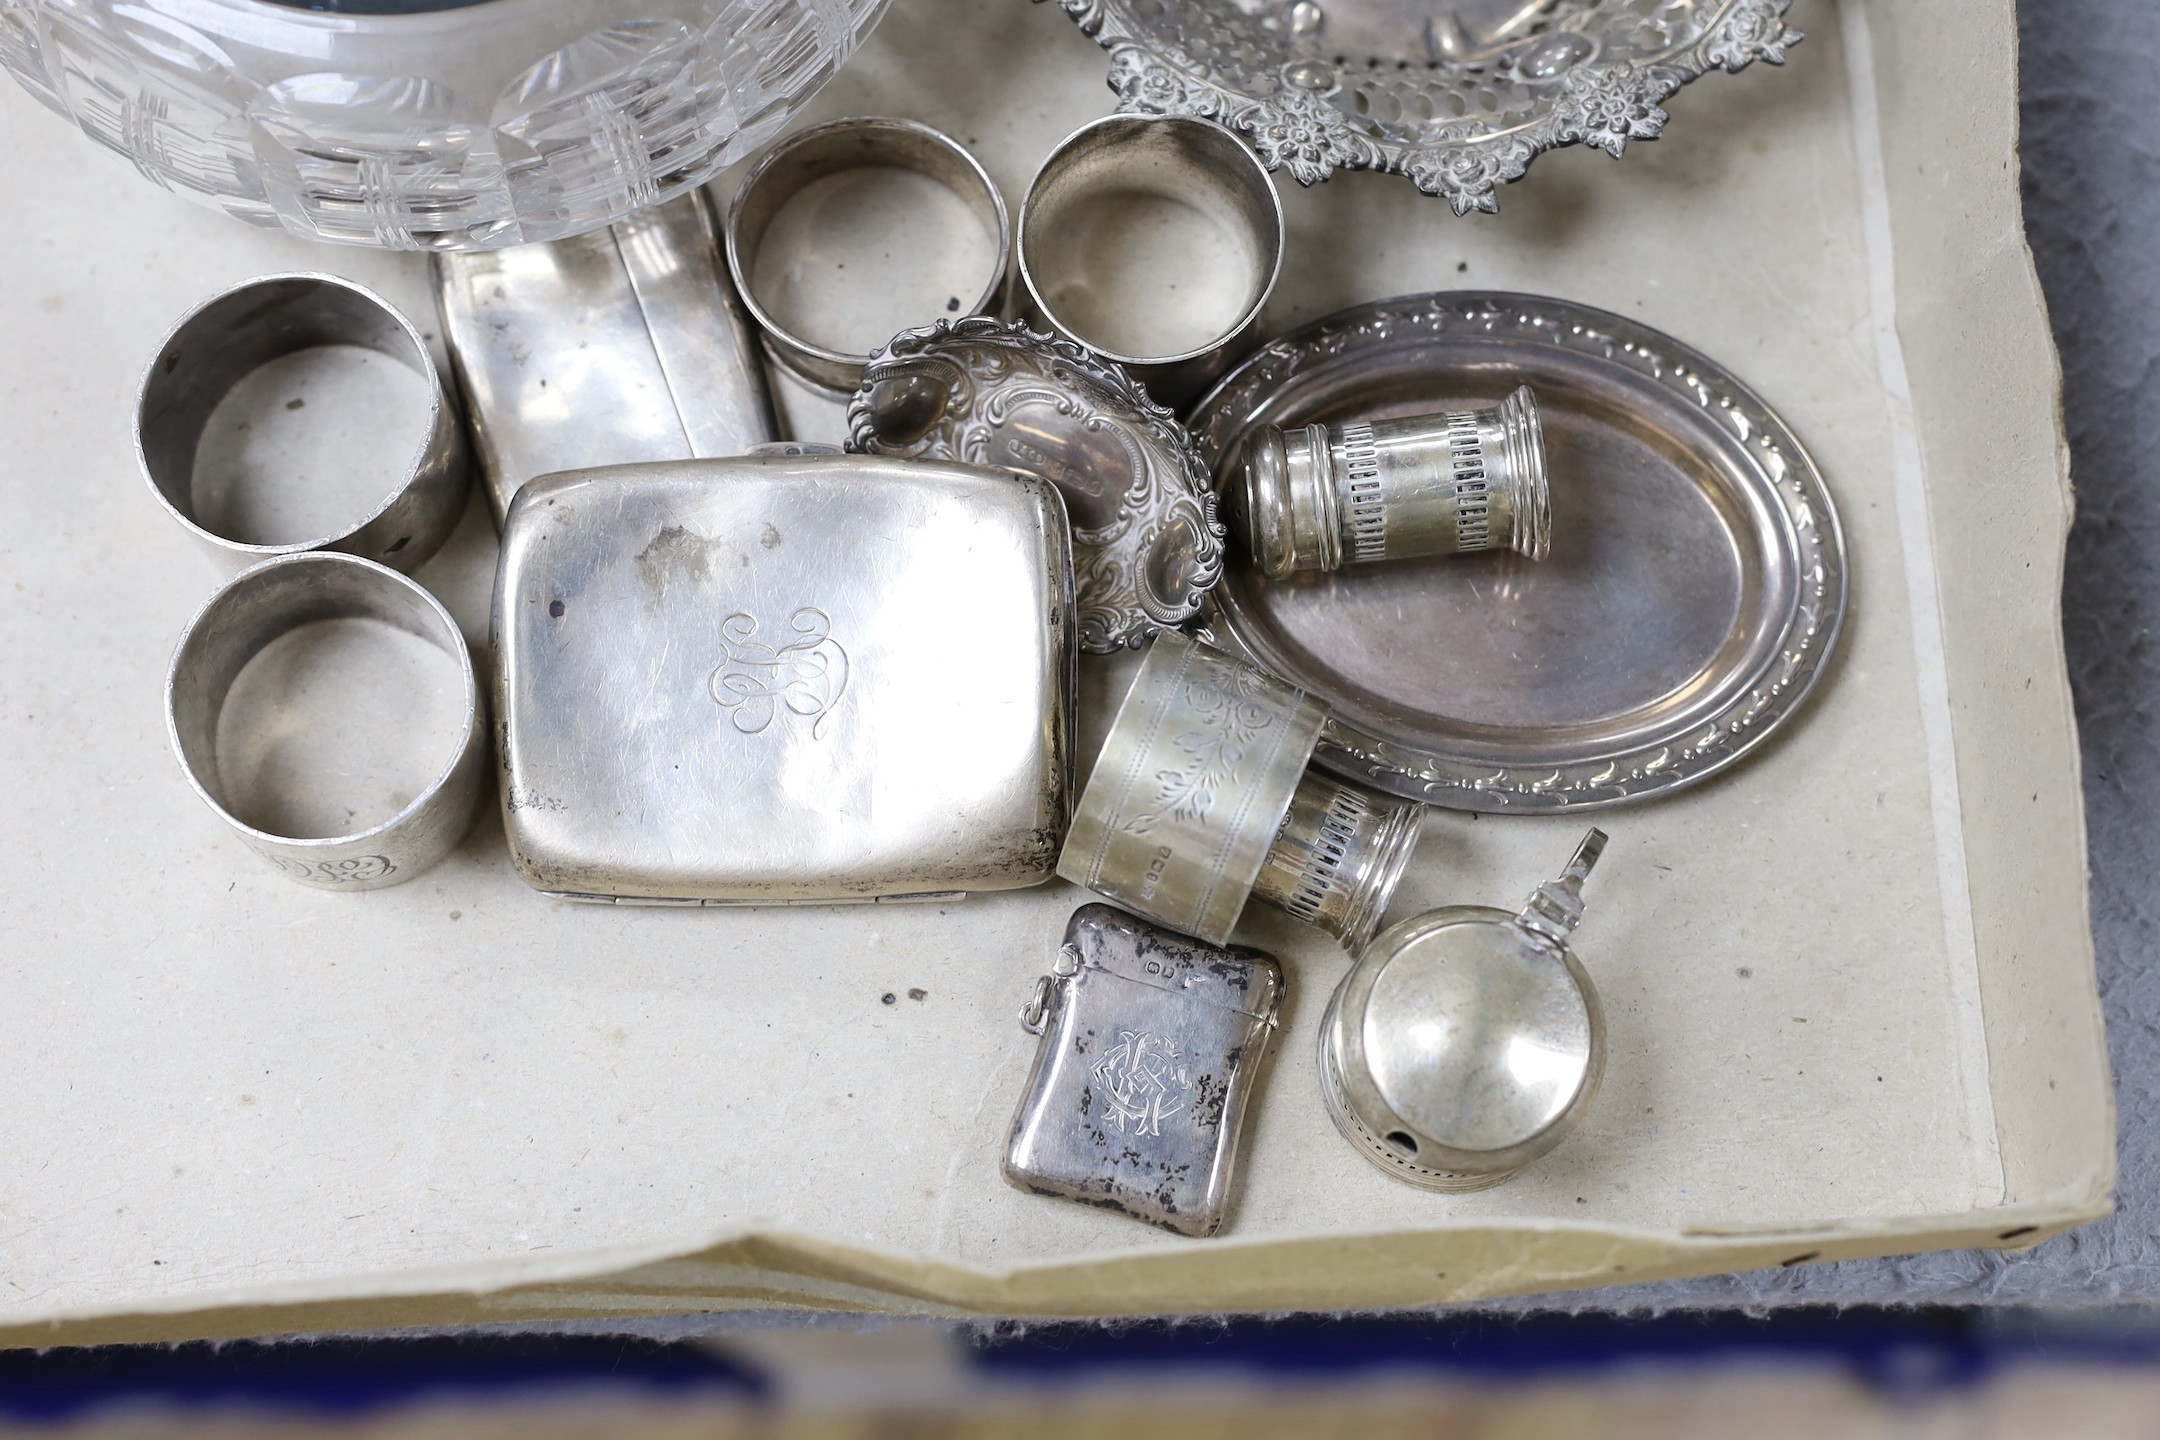 A George V silver mounted glass bowl and cover and other sundry silver including napkin rings, vesta case and condiments.